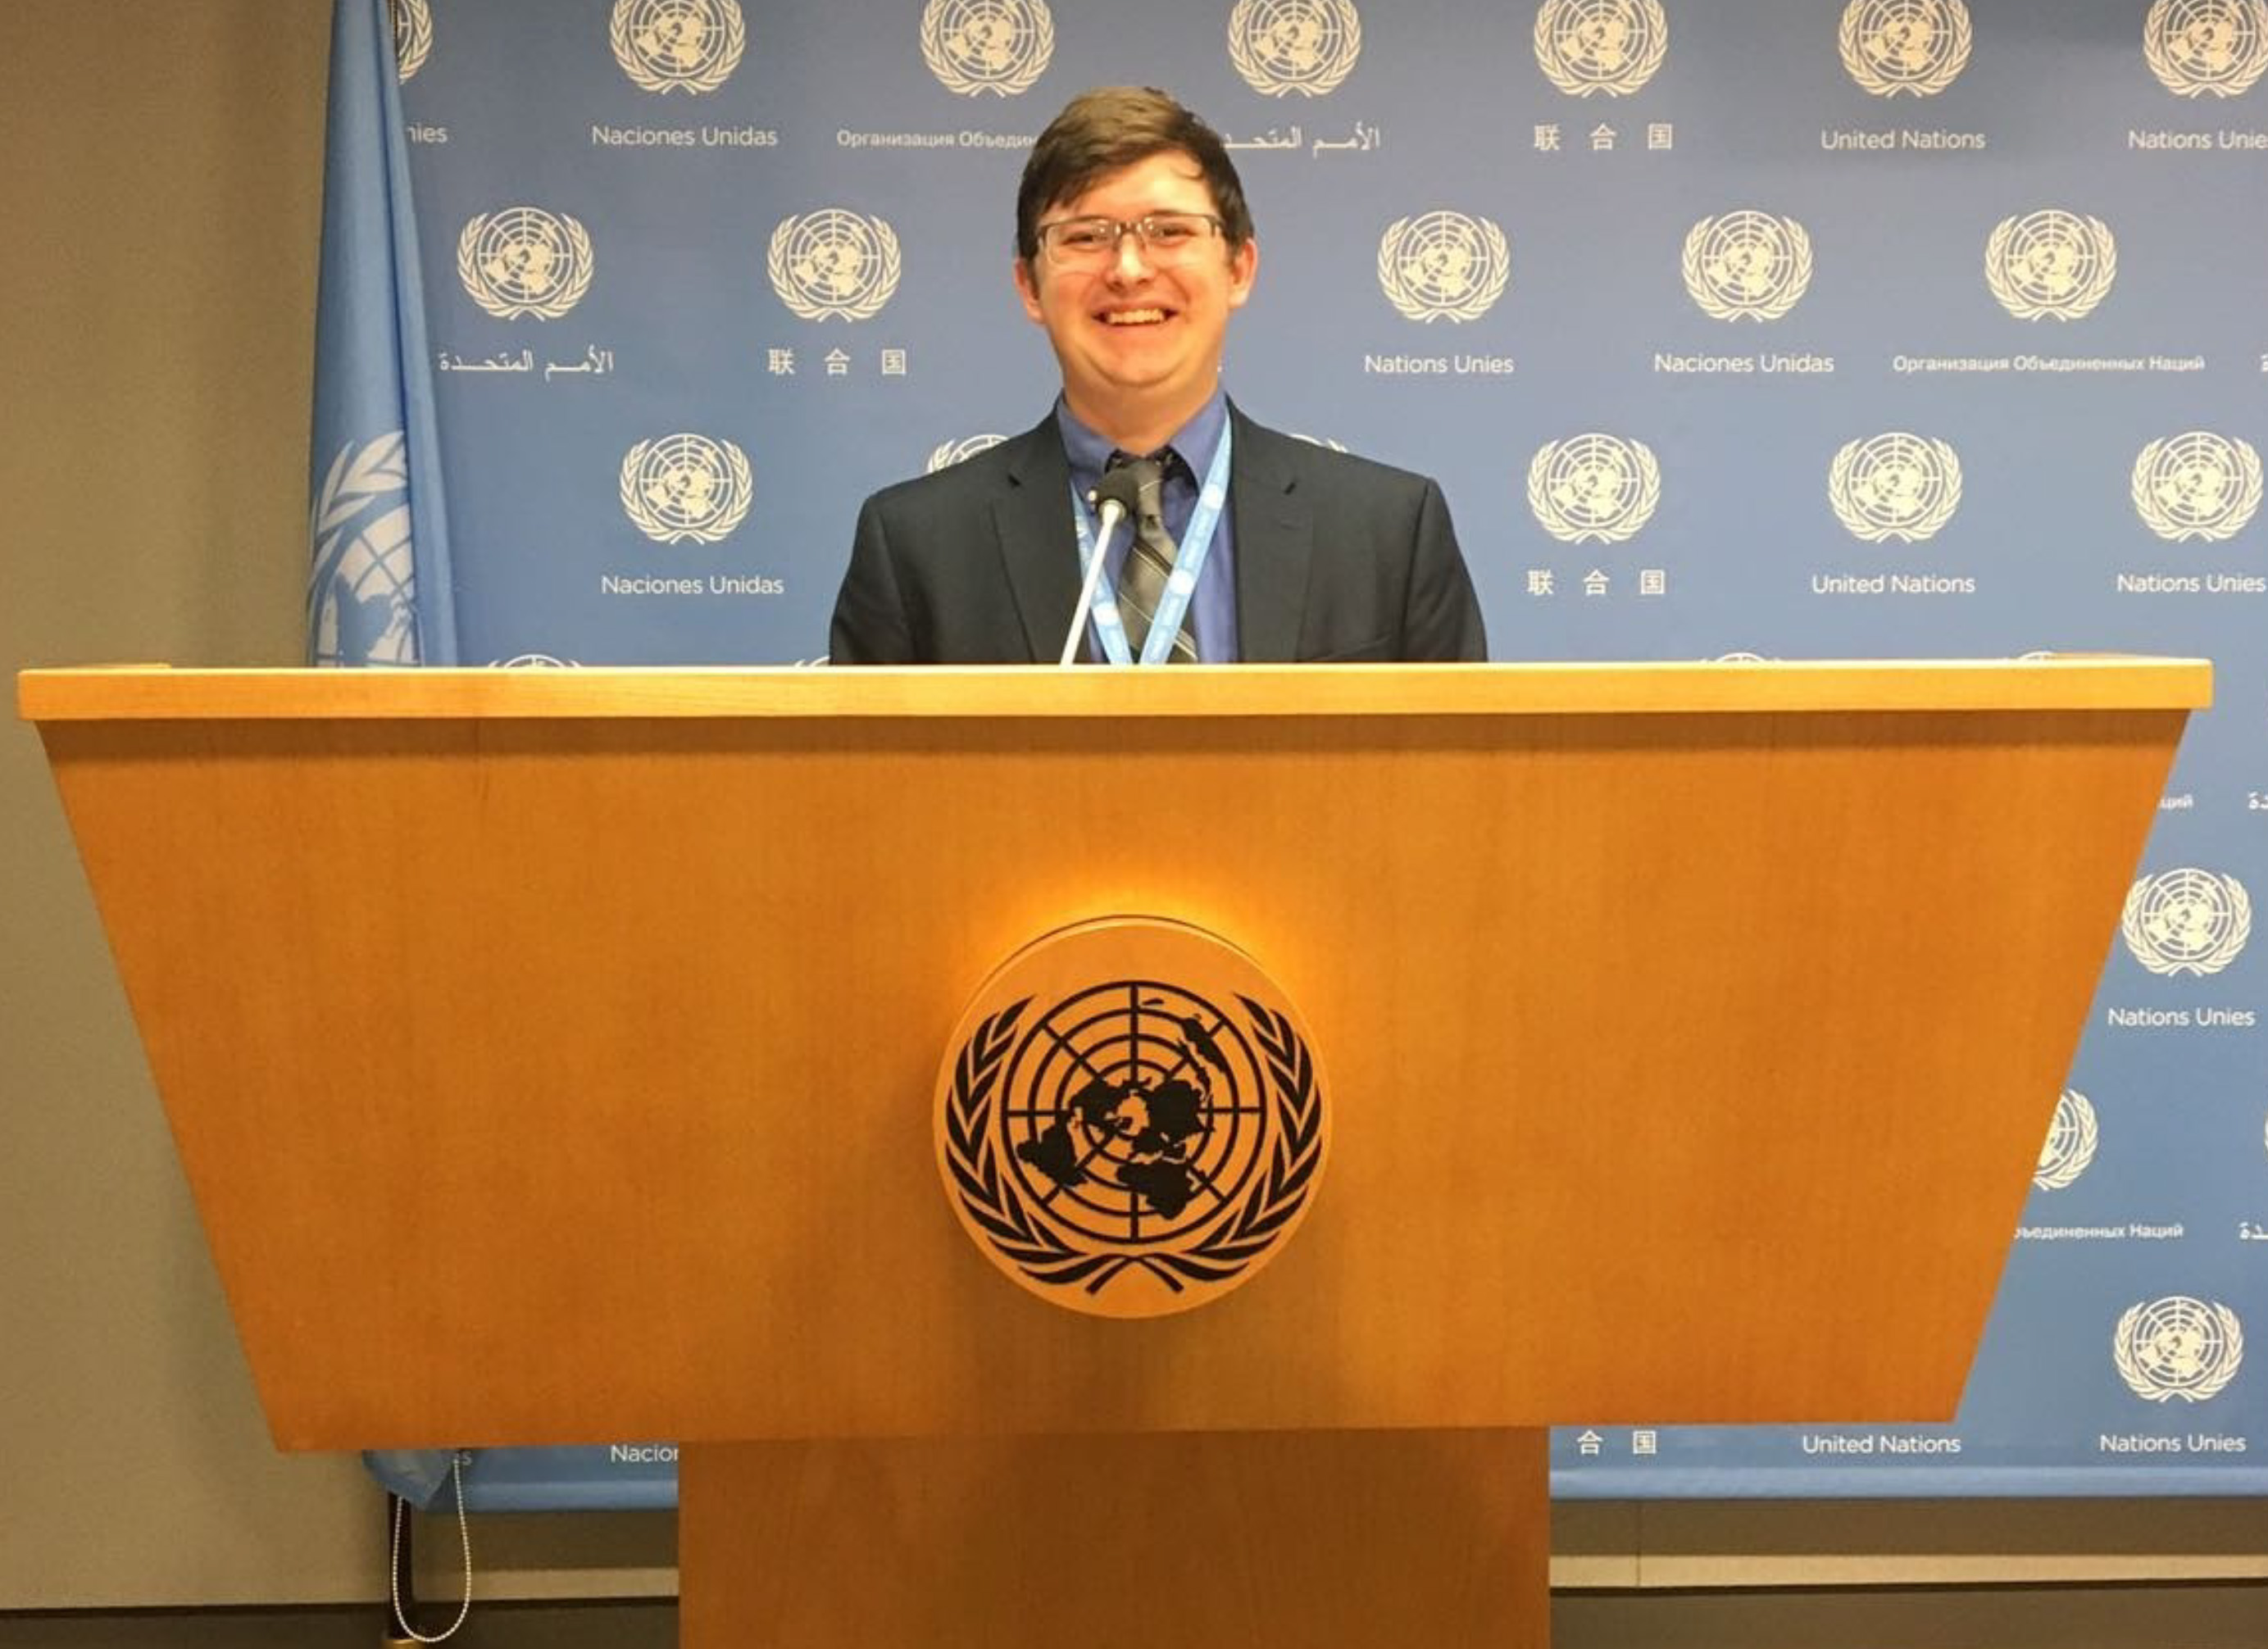 Matthew Cossel at the United Nations headquarters in New York City